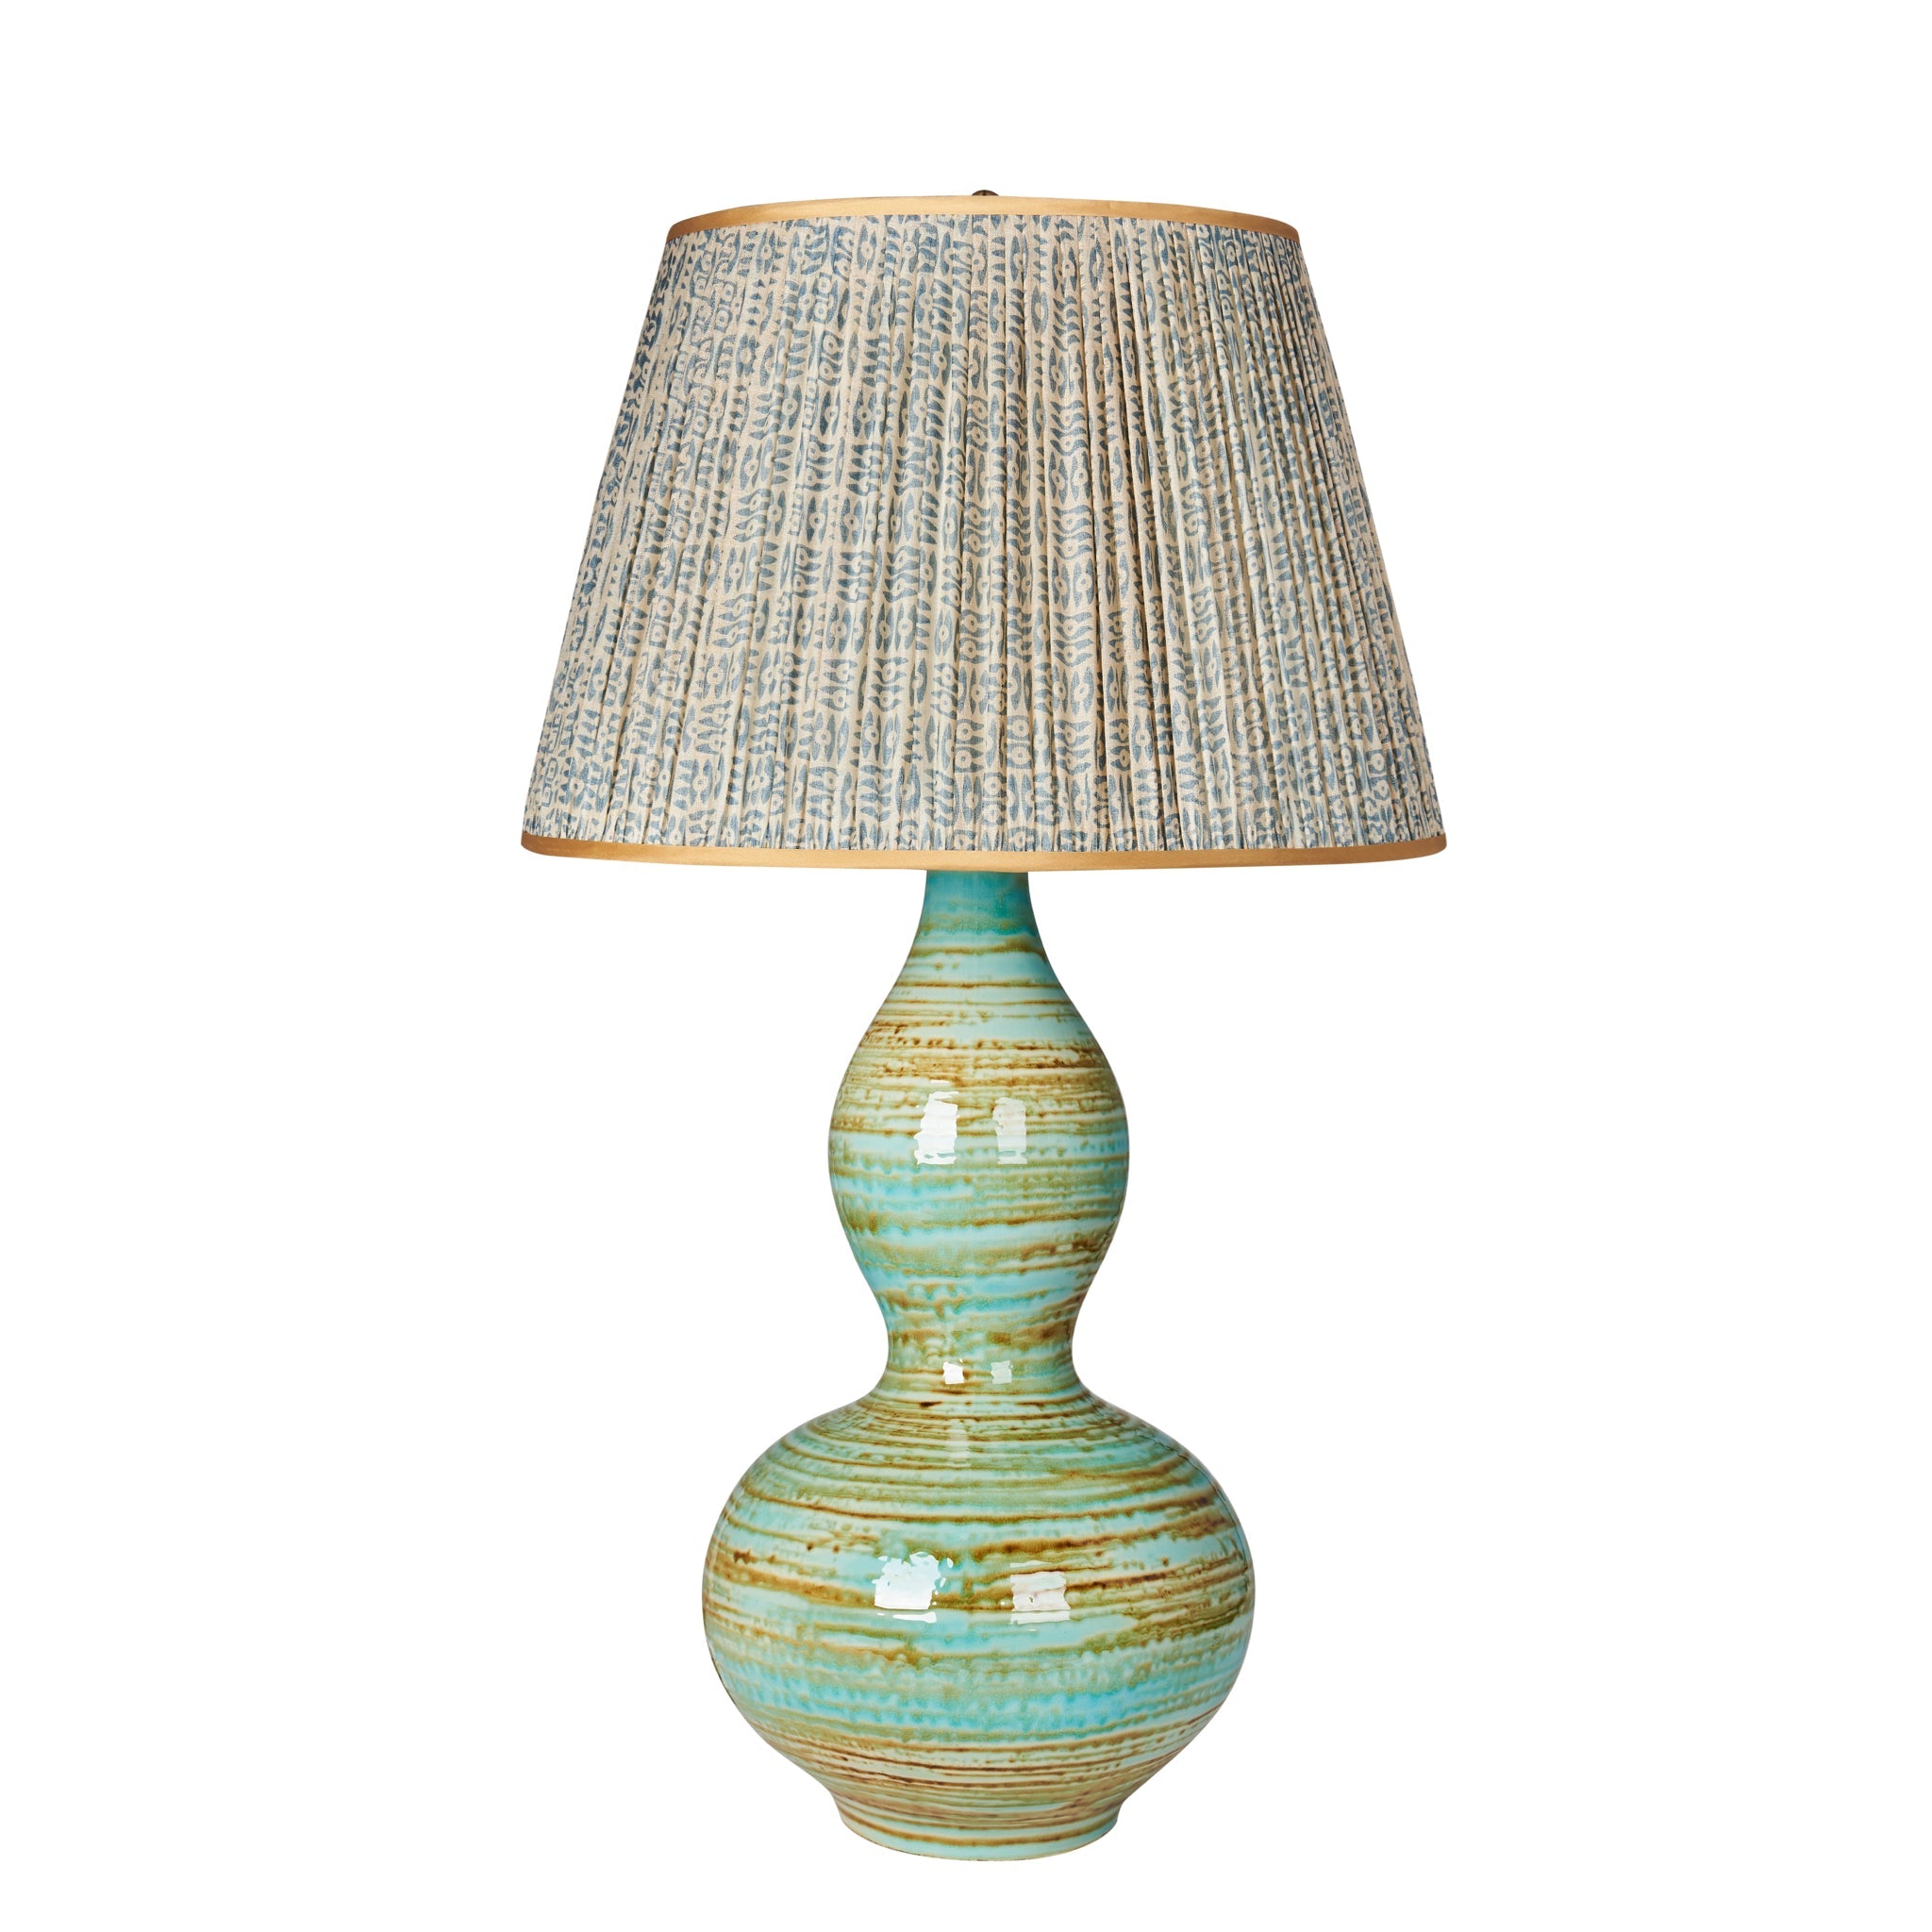 Inverted Blue and White Tribal Patterned Lampshade